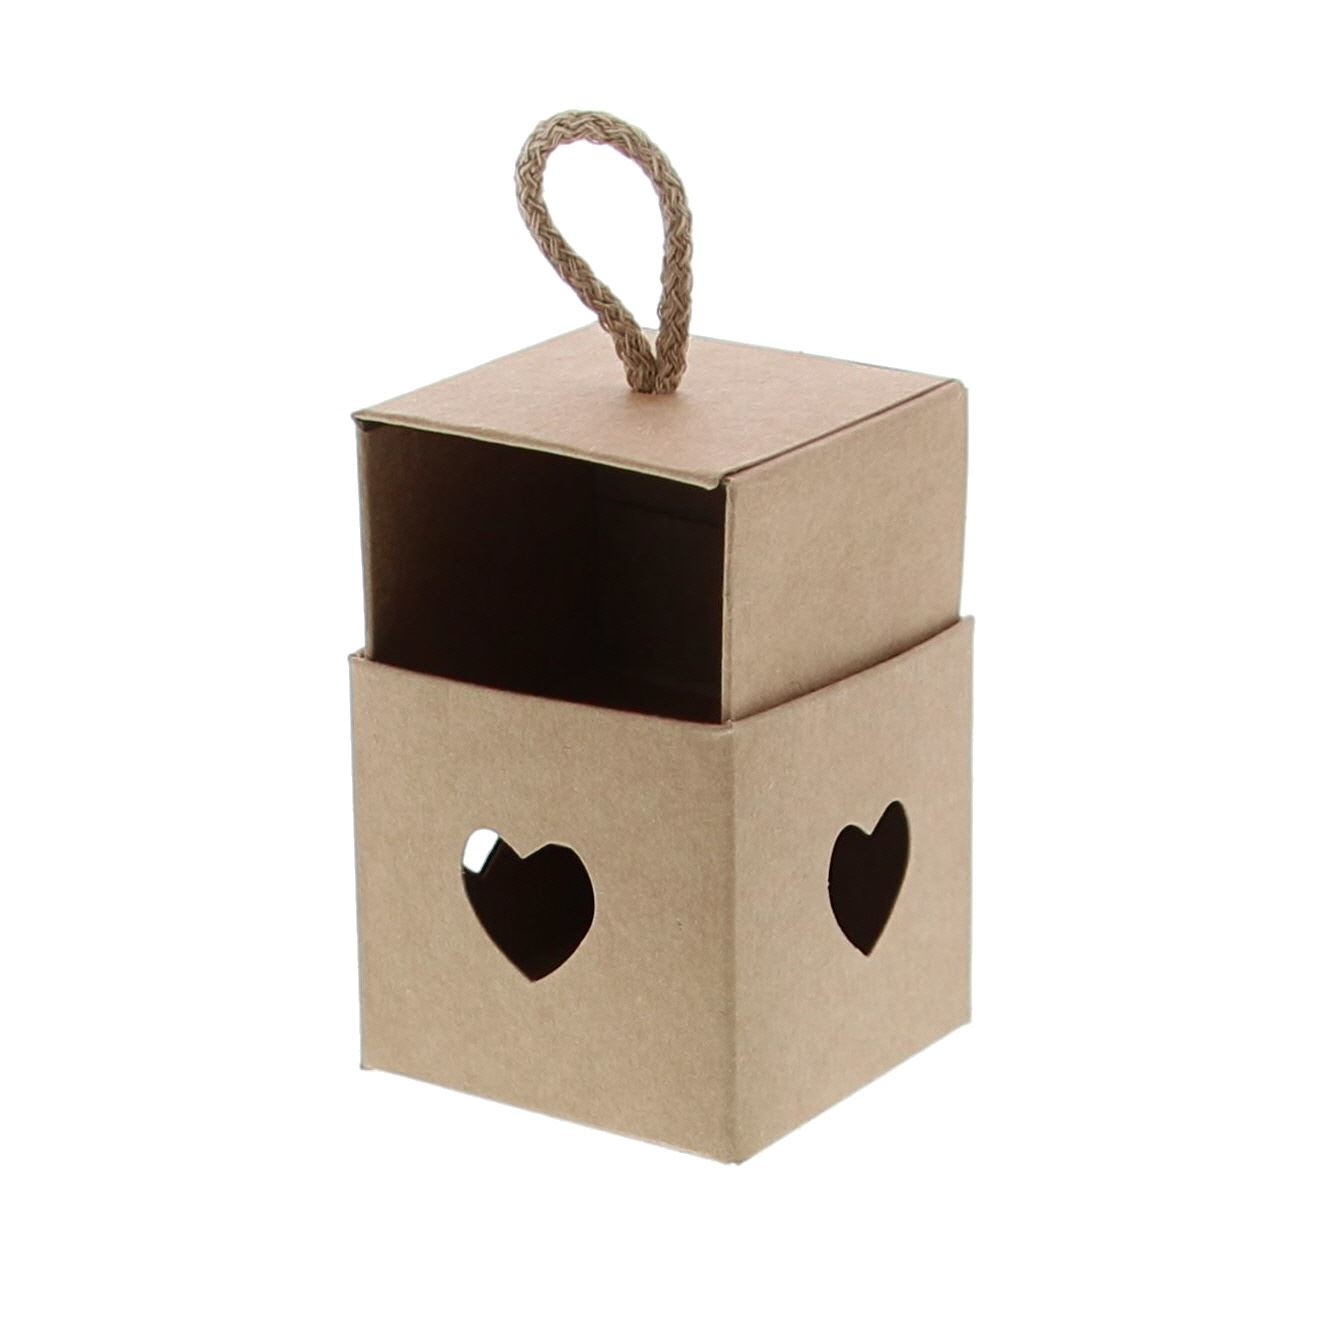 "Avana" Hearts insertion cube with cord (kraft) - 50*50*50mm - 100 pieces